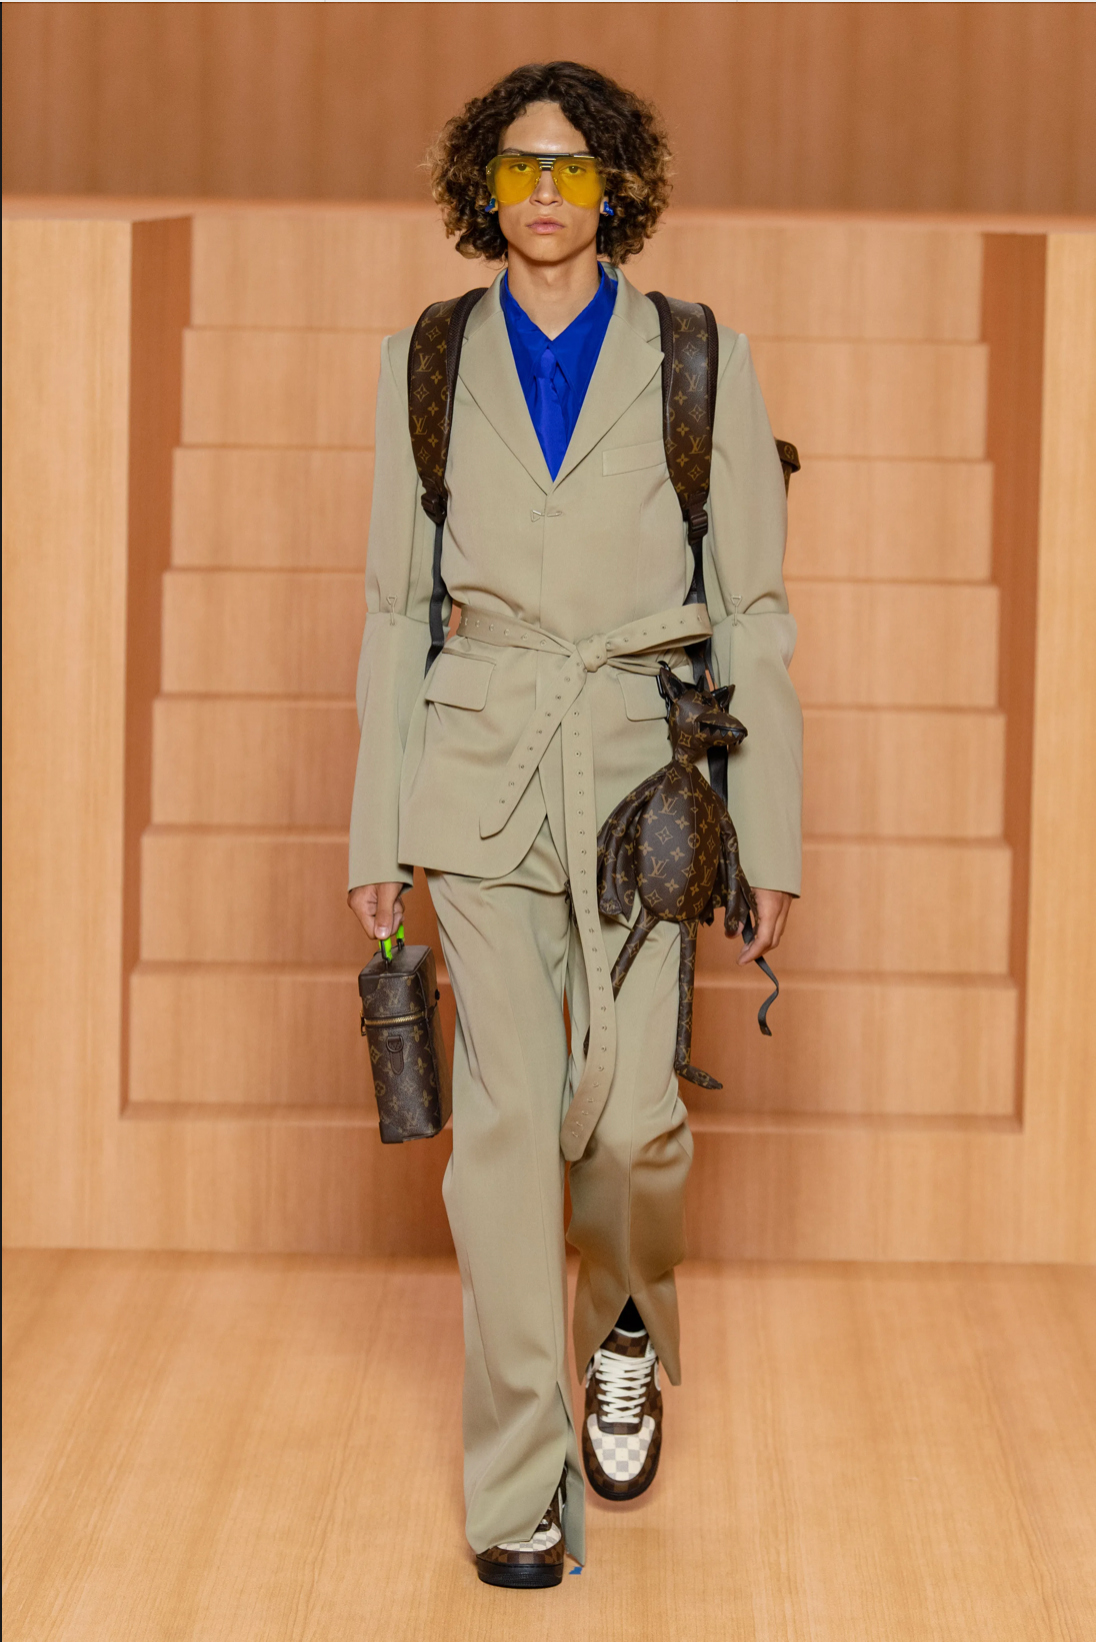 LYST - Louis Vuitton] men's SS '22 collection features neon gradients made  to look as if they've been spray painted. What do you think of the  collection— would you #Lyst it or